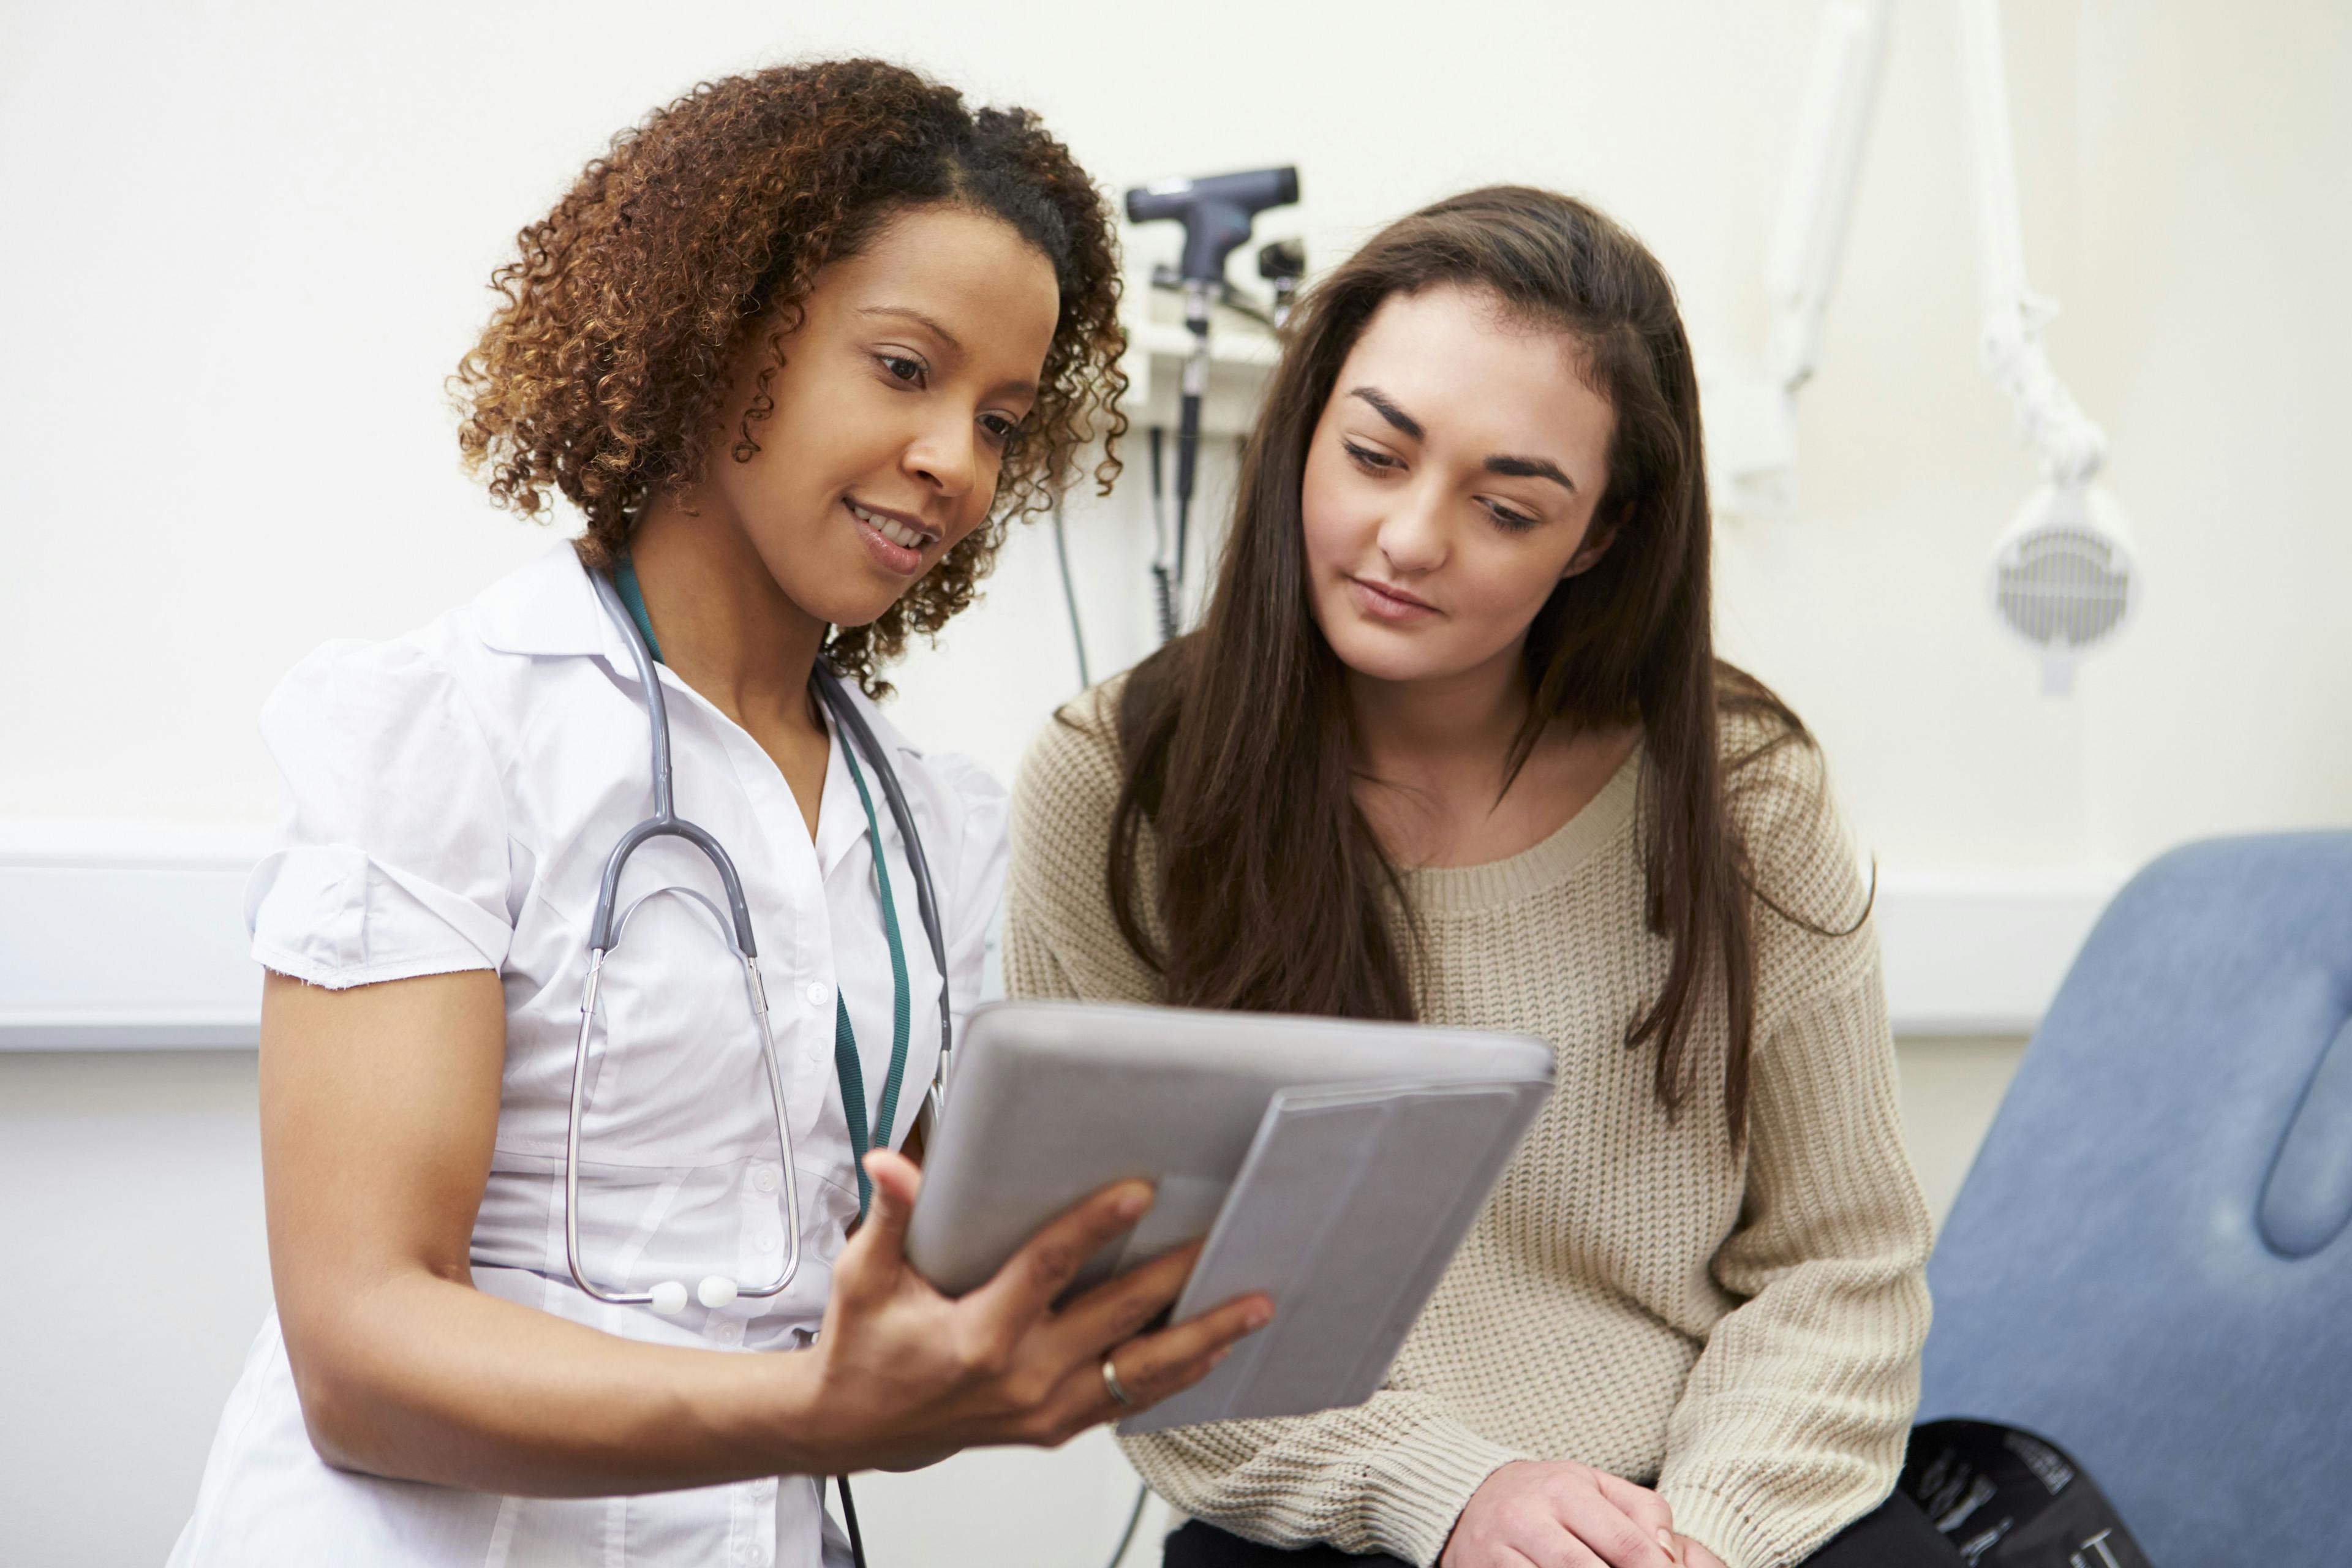 Adolescents and young adults with sickle cell disease need standardized sexual and reproductive health counseling 